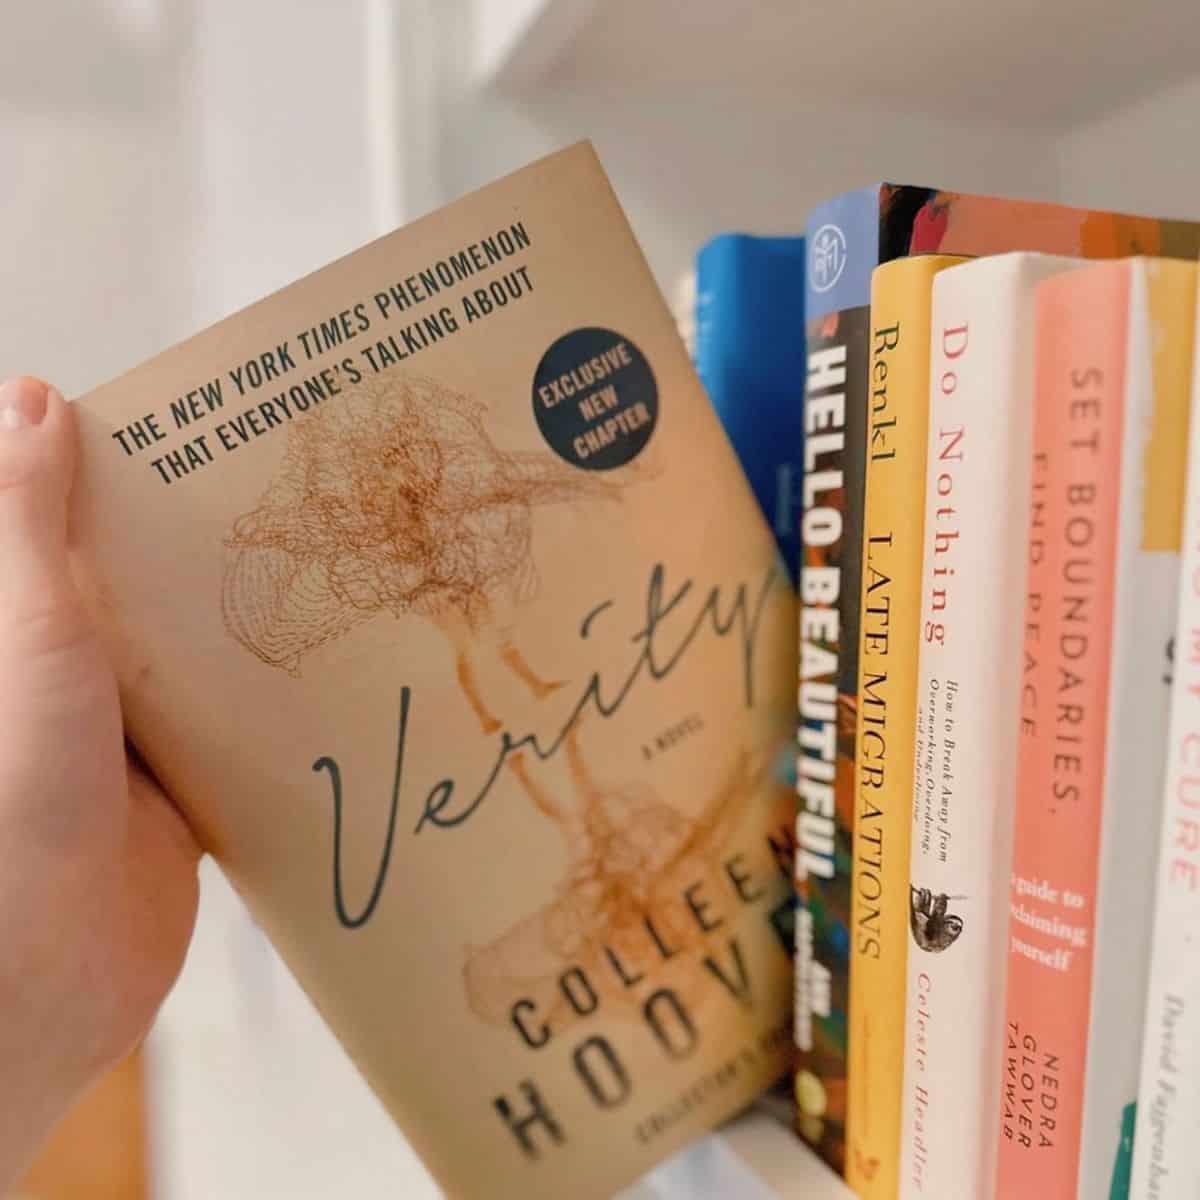 verity by colleen hoover being pulled from a bookshelf.